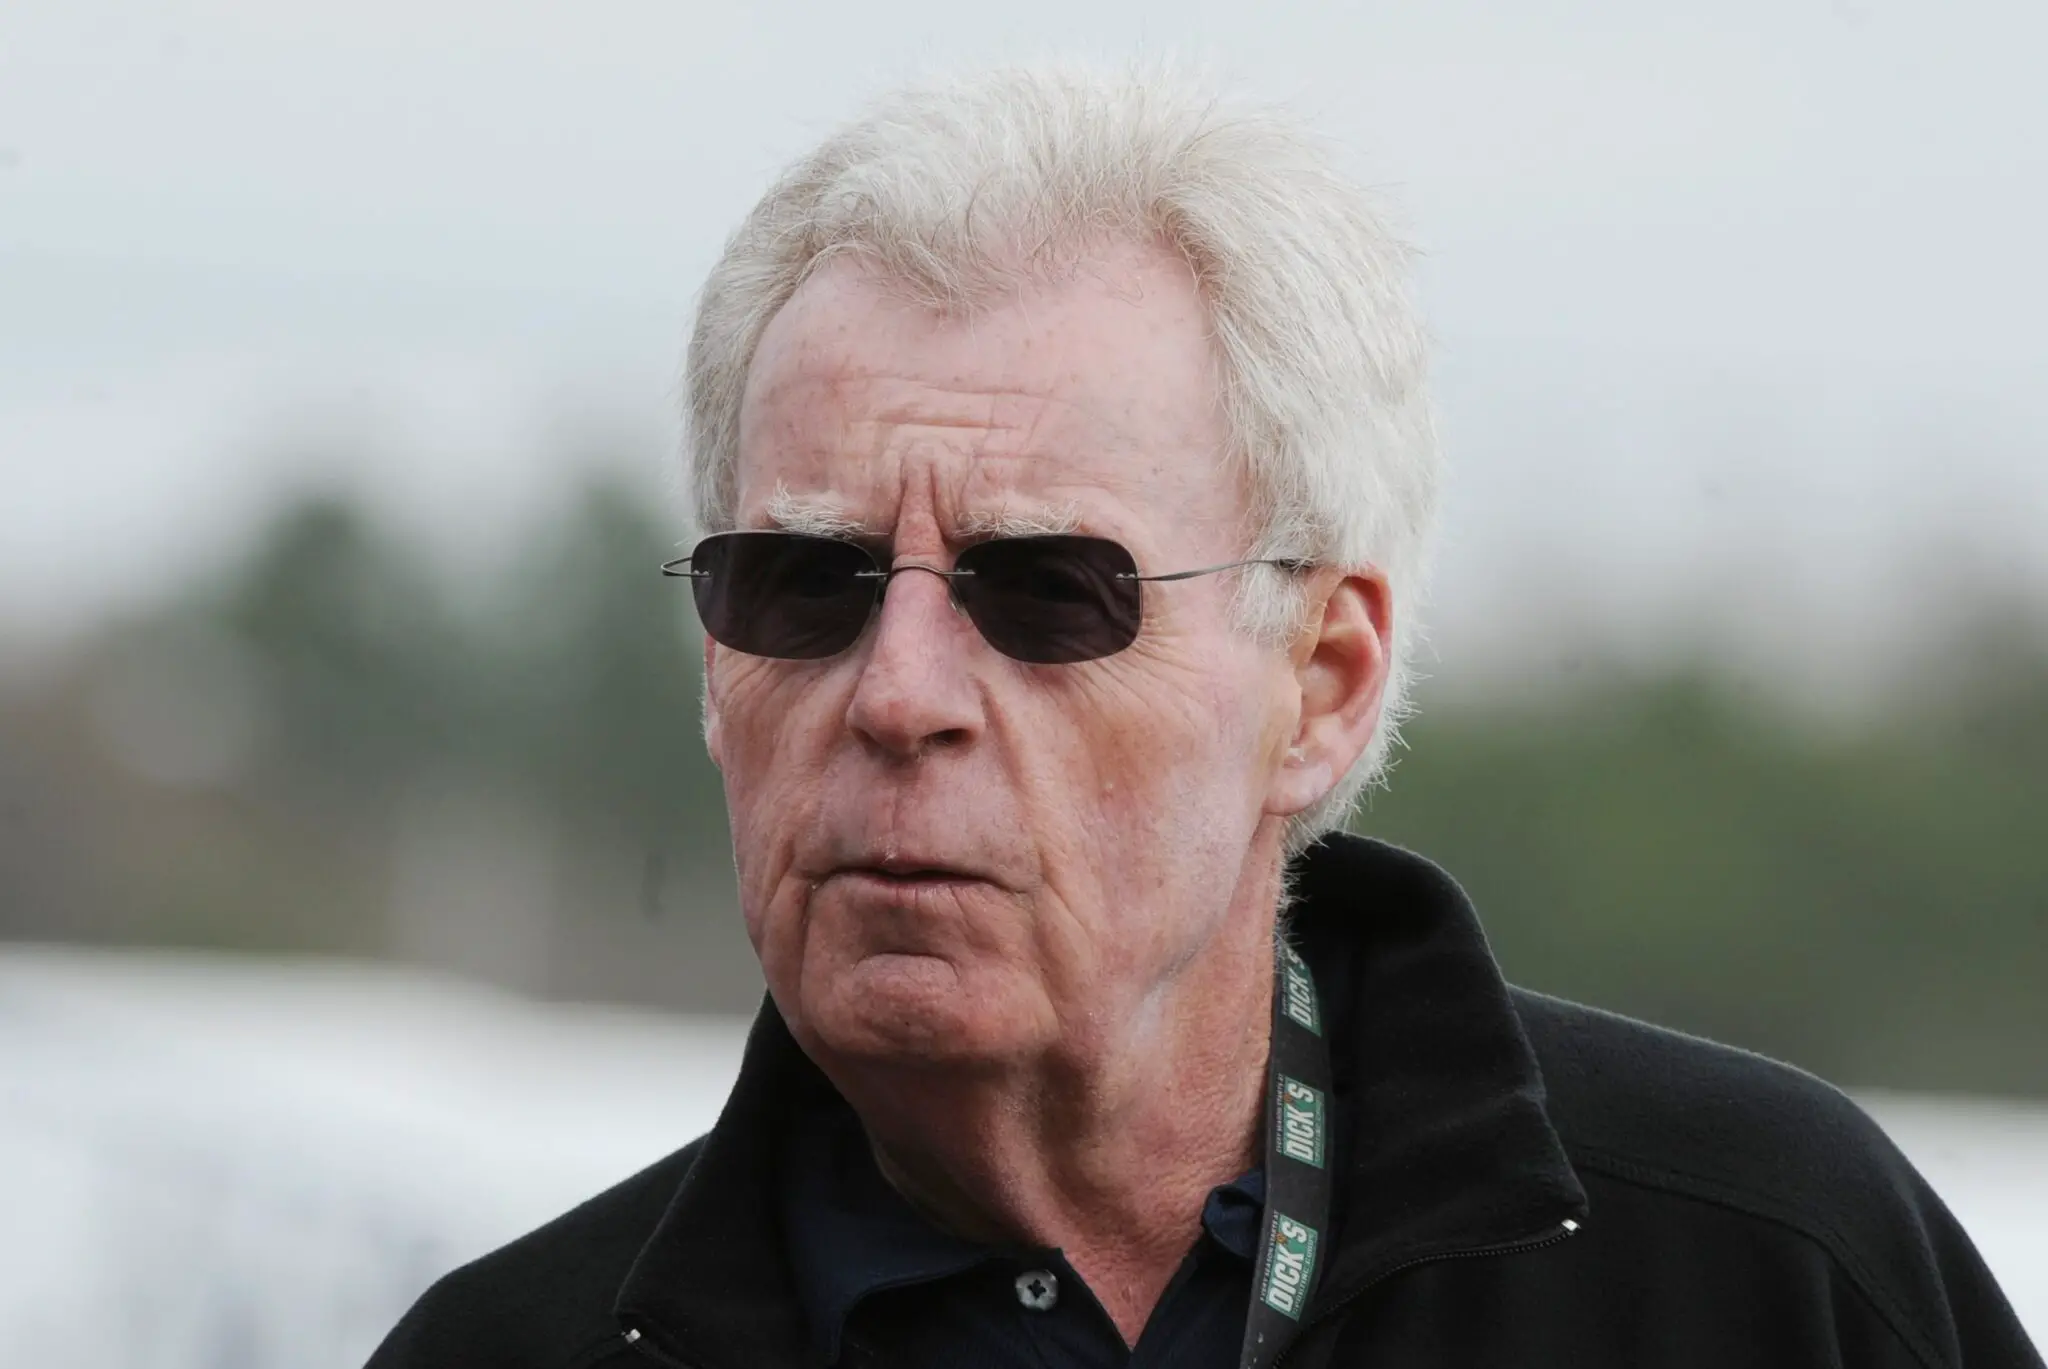 Peter Gammons Bio, Wiki, Age, Height, Parents, and Net Worth